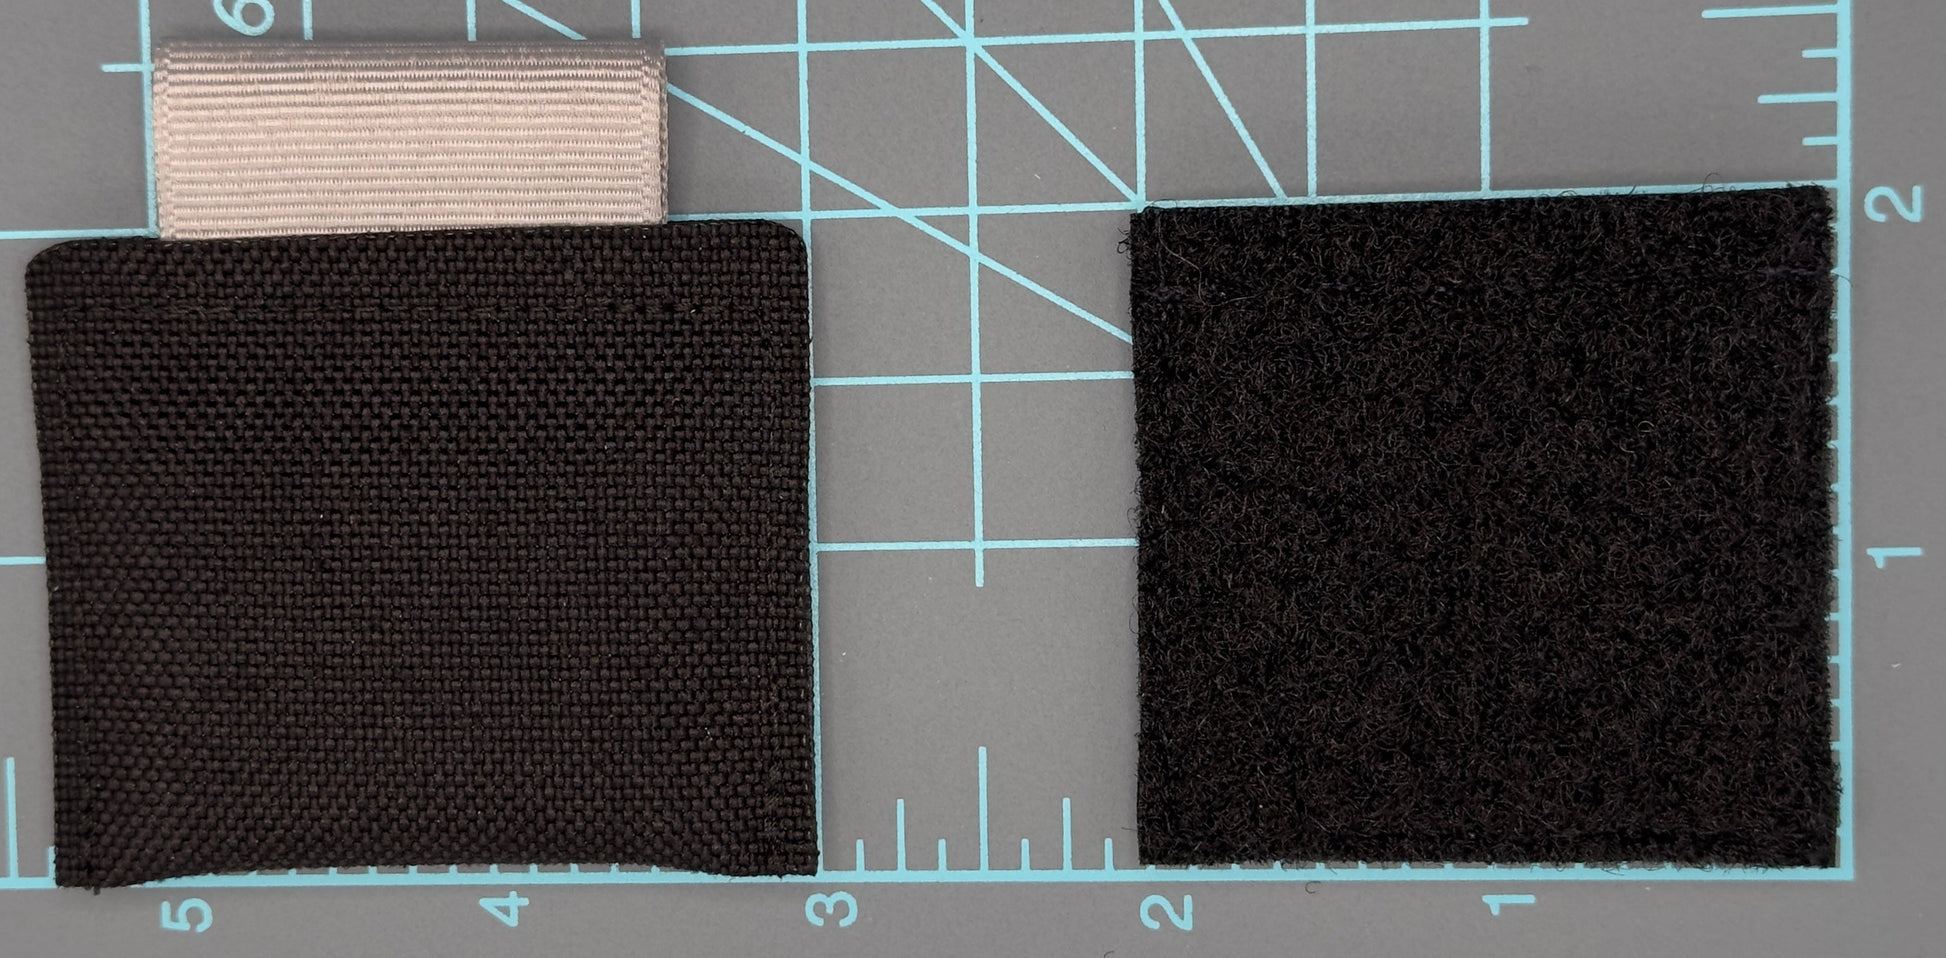 Velcro patch for addition of multiple patches